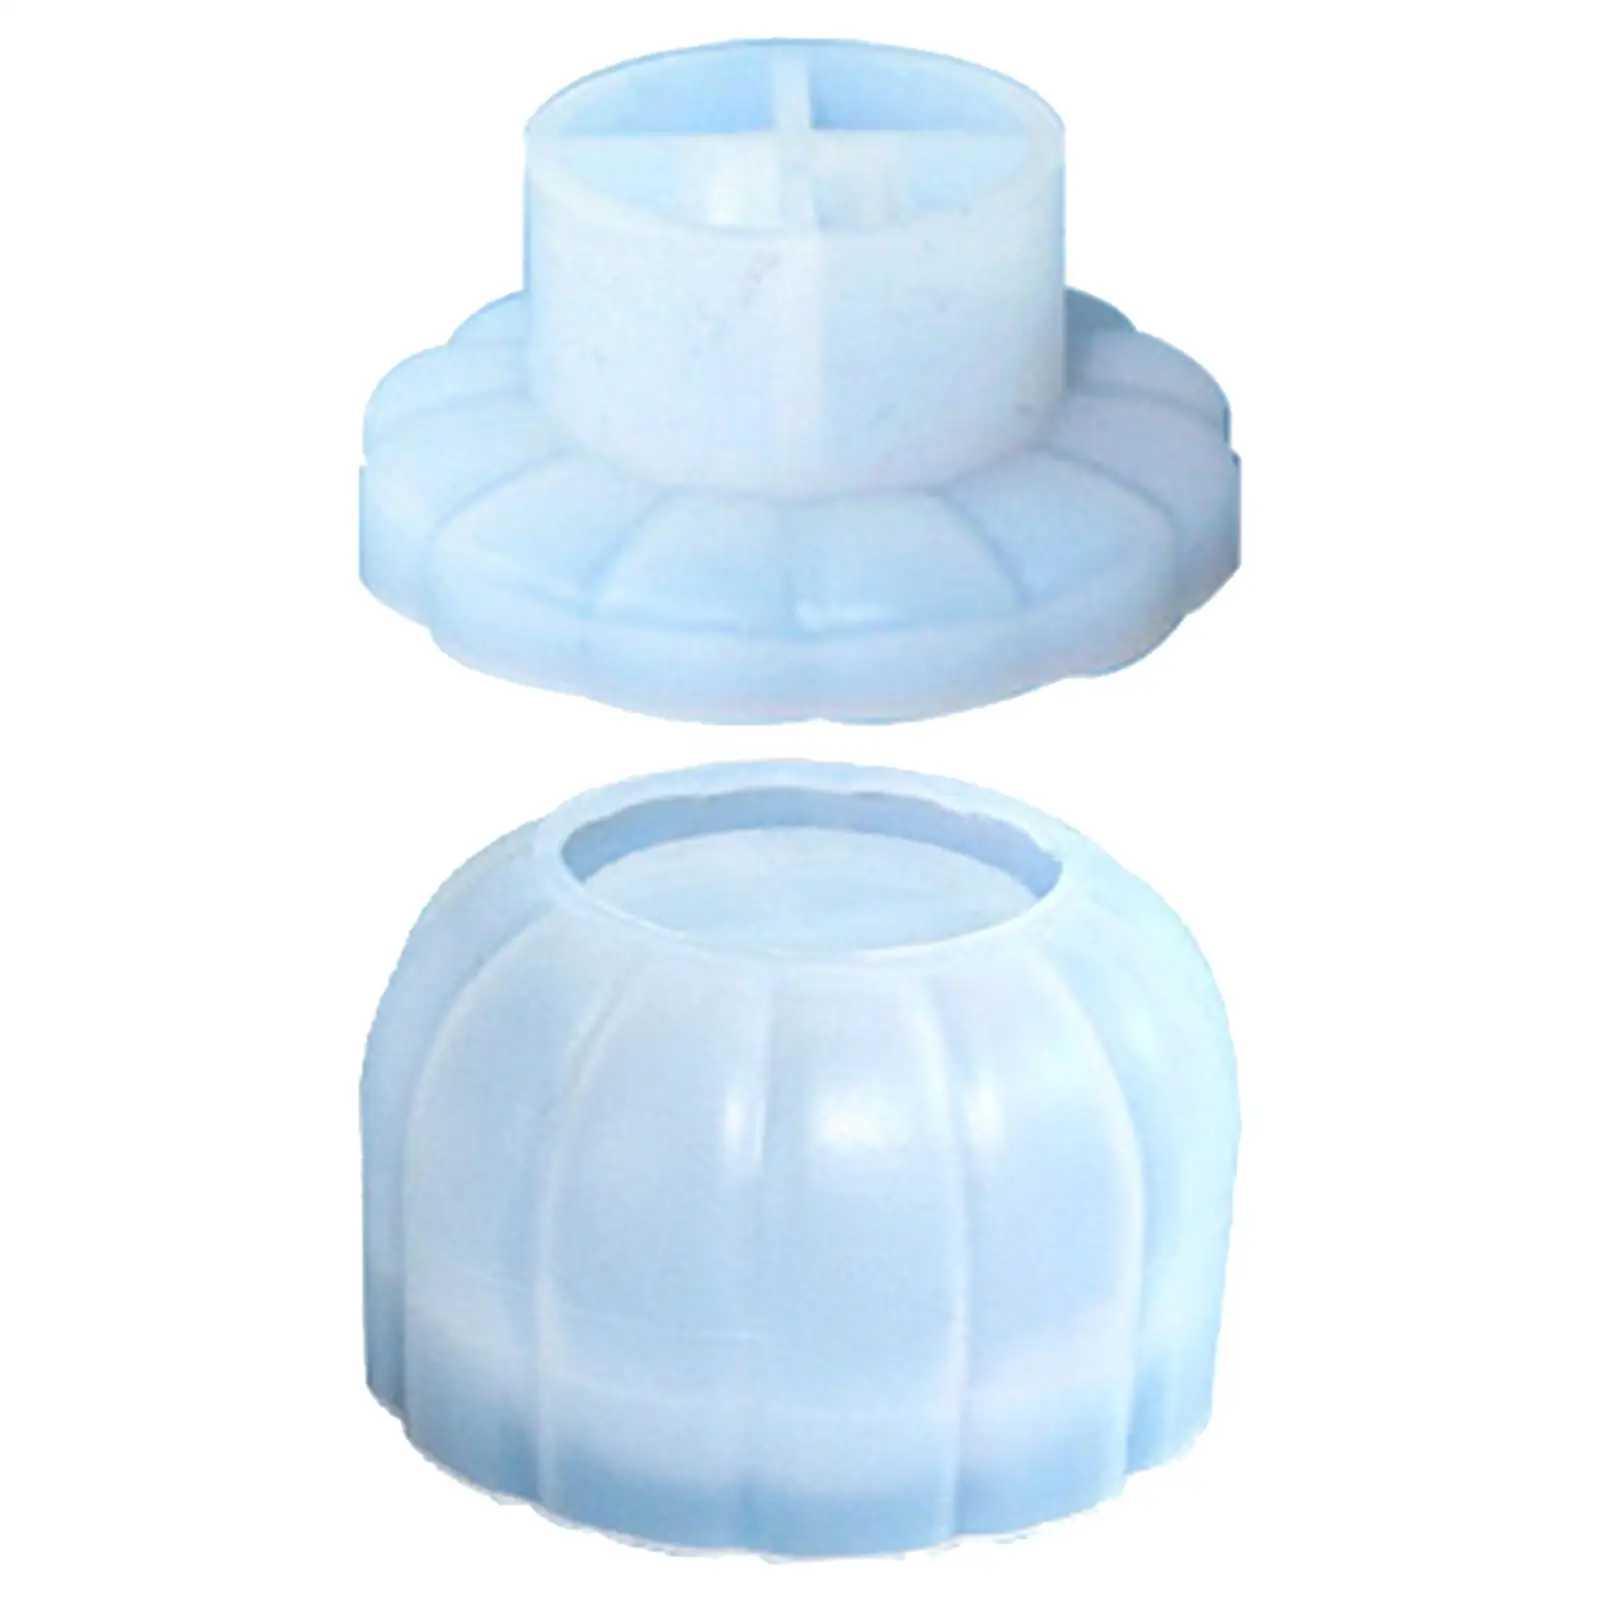 Resin Casting Mould Candy Jar Soap Crafts Silicone Jewelry Box Mould